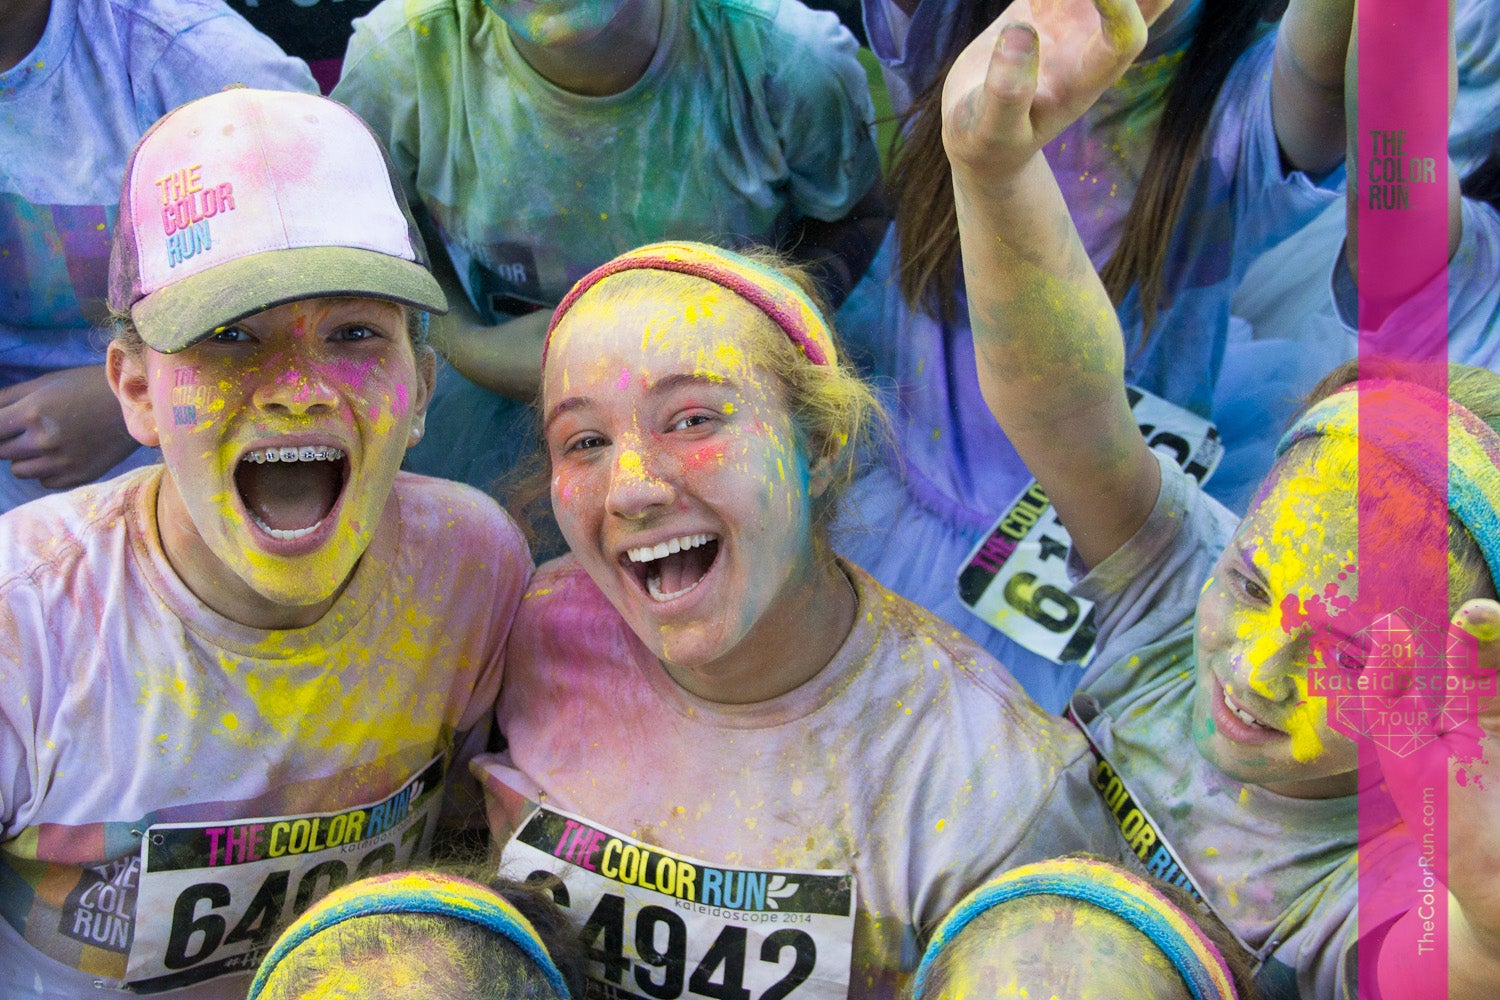 With hundreds of events per year, The Color Run sponsorship will bring new visibility to Alcatel - From CES 2015 – Brands to watch in the US: Alcatel (part 1 of 2)